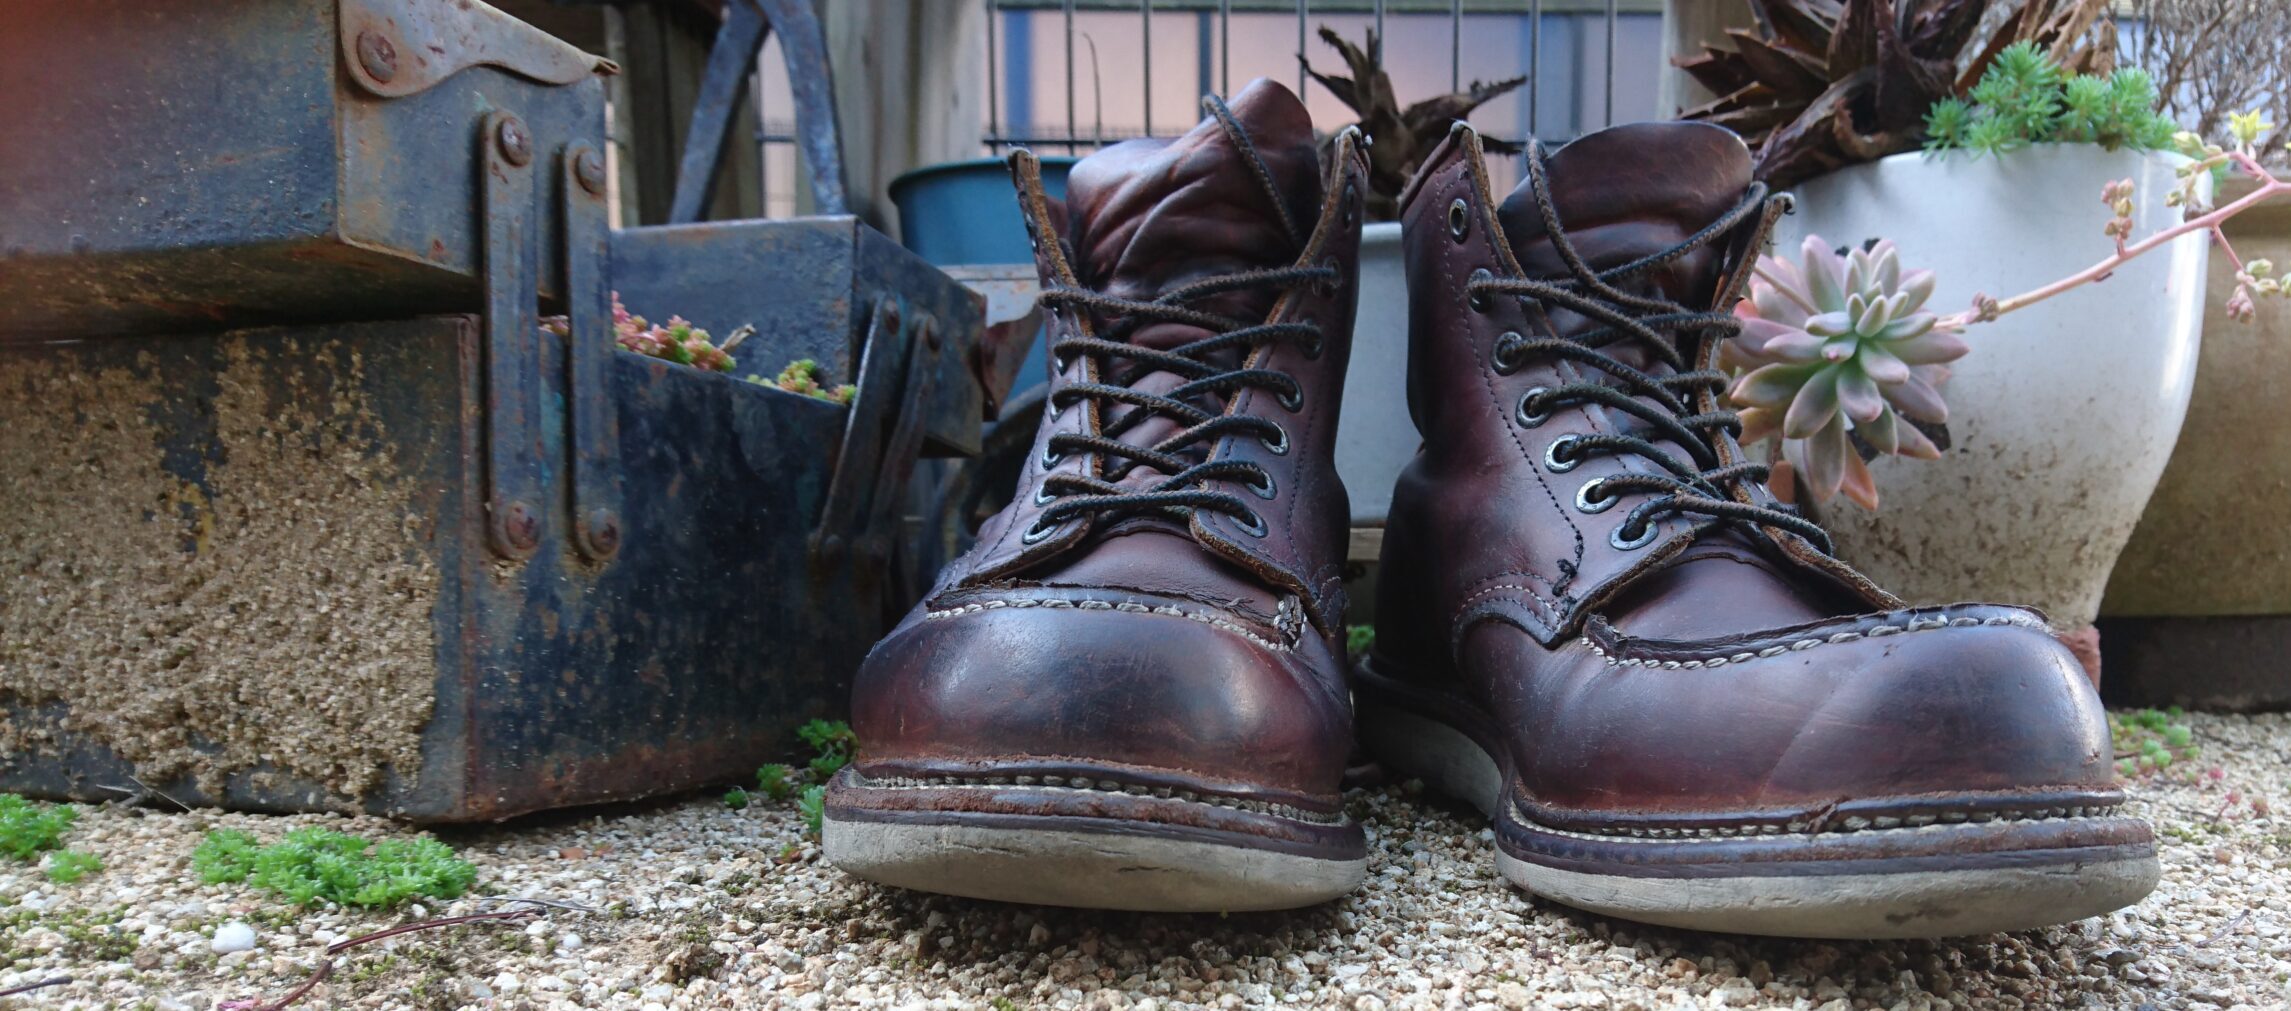 redwing1907 カッパーラフ＆タフ　経年変化　エイジング　革　ワークブーツ